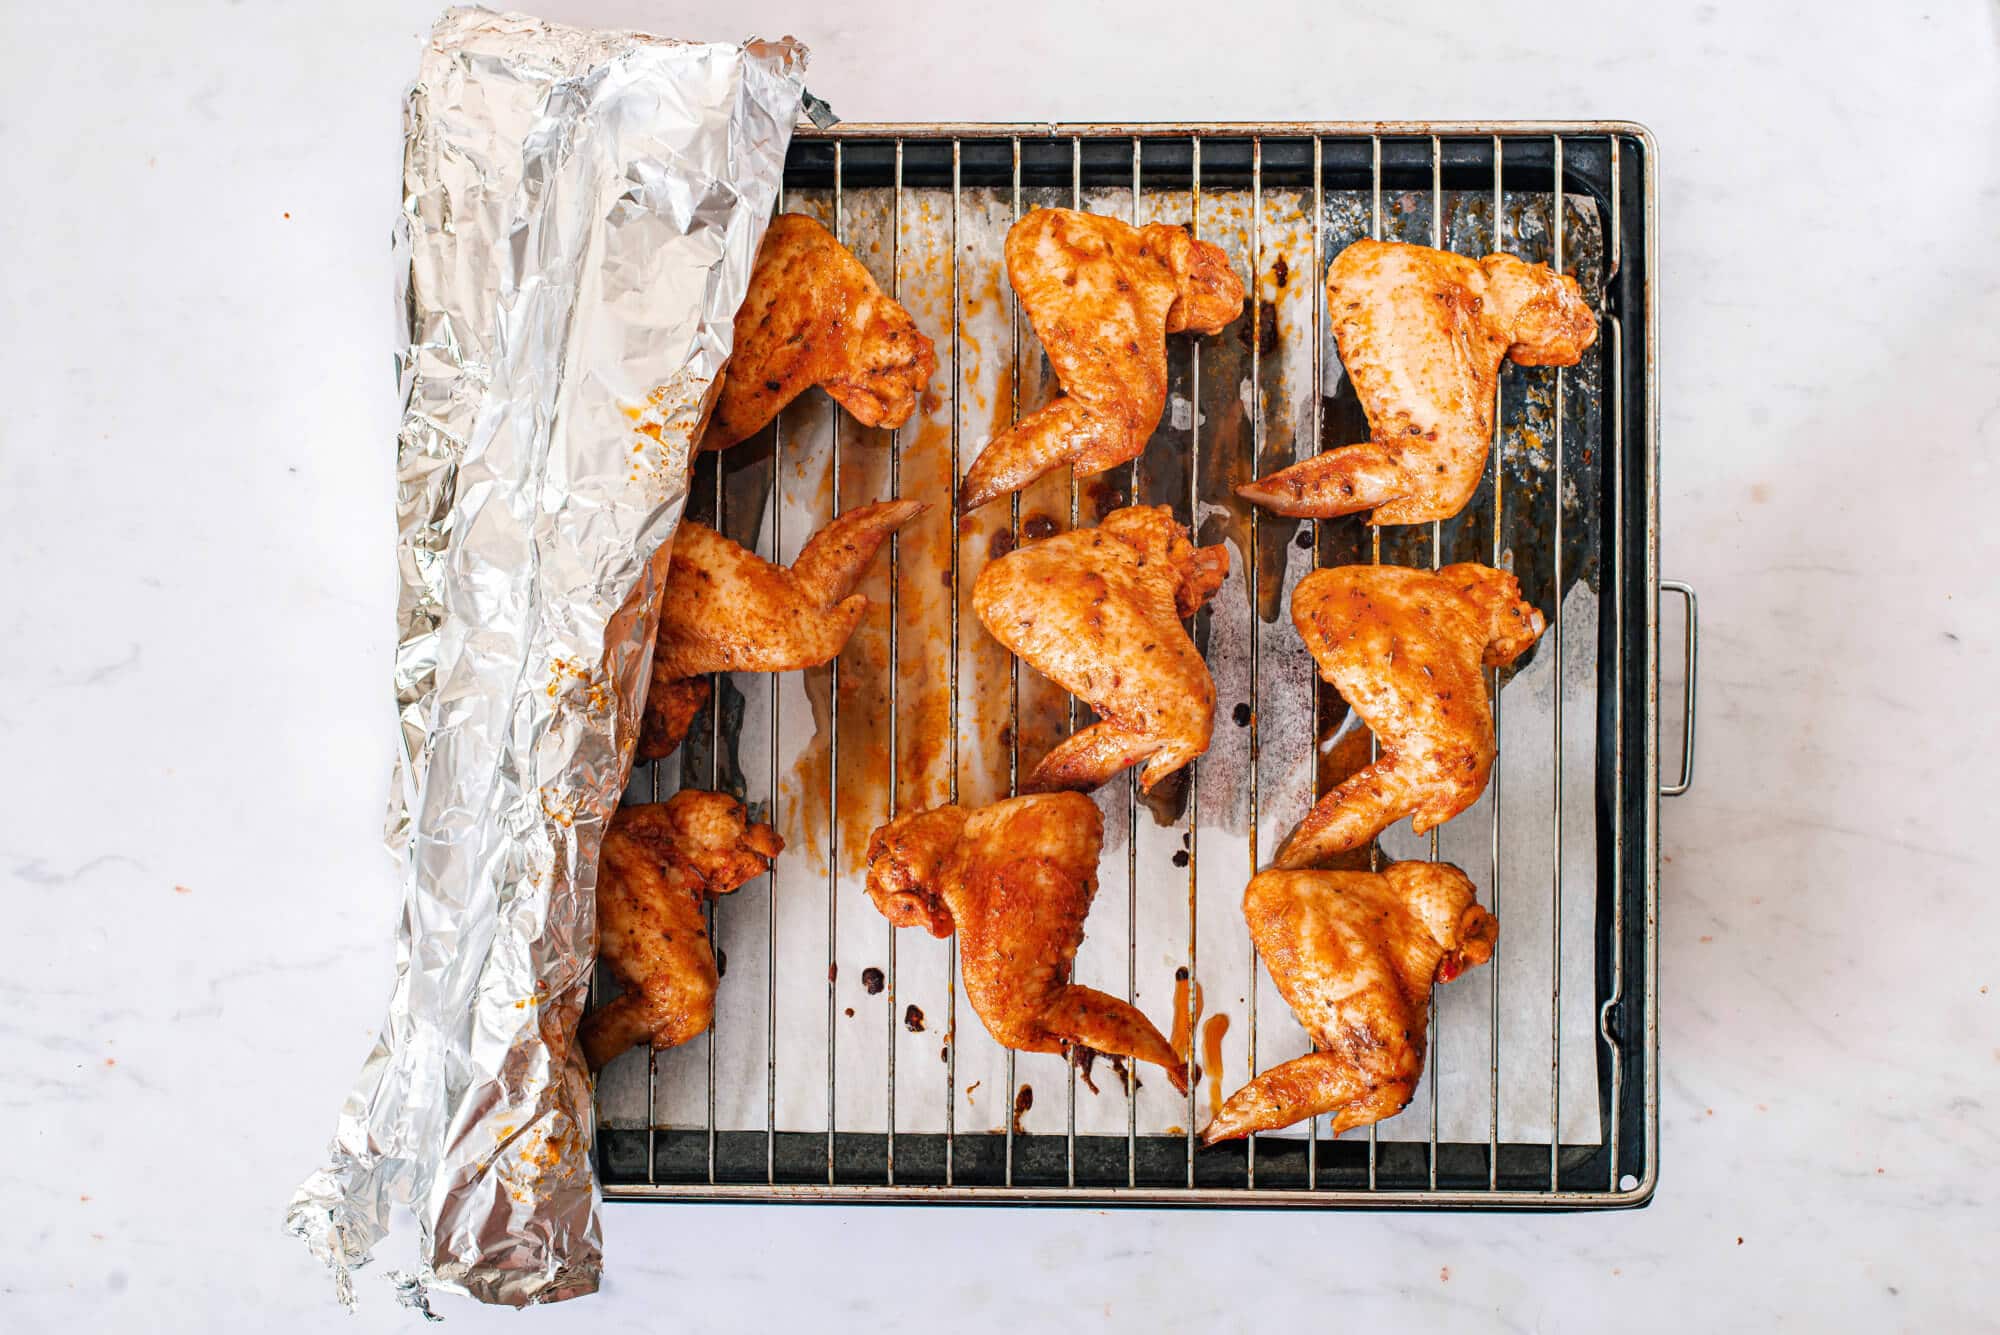 raw-chicken-wings-on-a-wire-rack-on-a-baking-tray-with-tinfoil-on-the-side